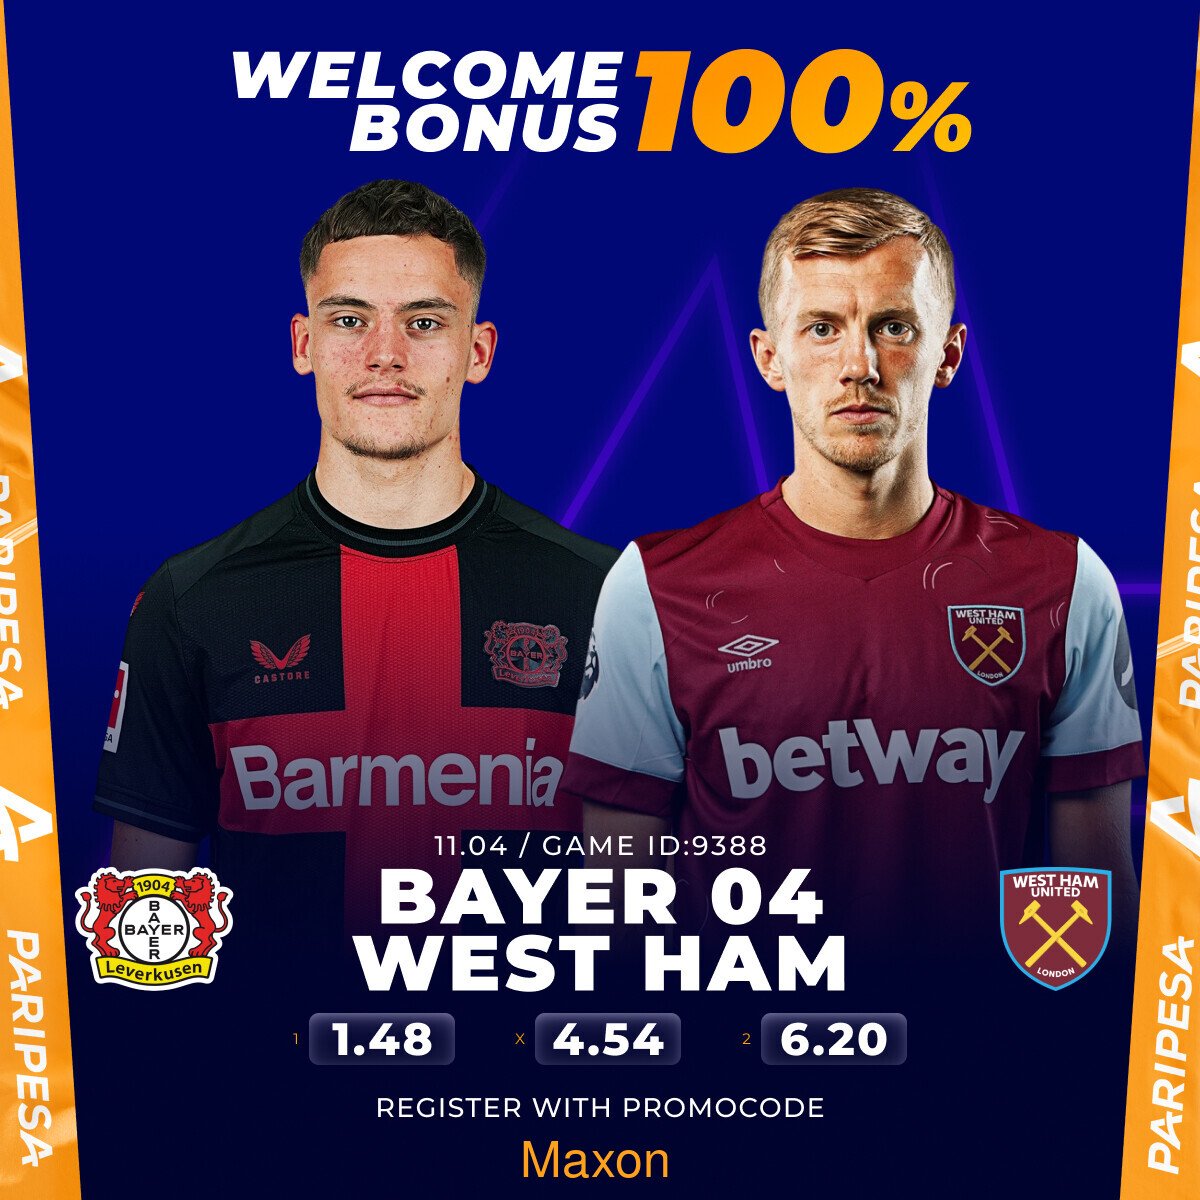 Leo ni Europa League Wirtz against Ward-Prowse😁 Leverkusen vs Westham tonight ♦️Offers •Boosted odd in all games • Tax free on stake or winnings •Fast payouts and deposits ♦️Deposit as low as 70 KES♦️ How to register Link: bit.ly/3QIlmmG promocode: MAXON (Sigor)